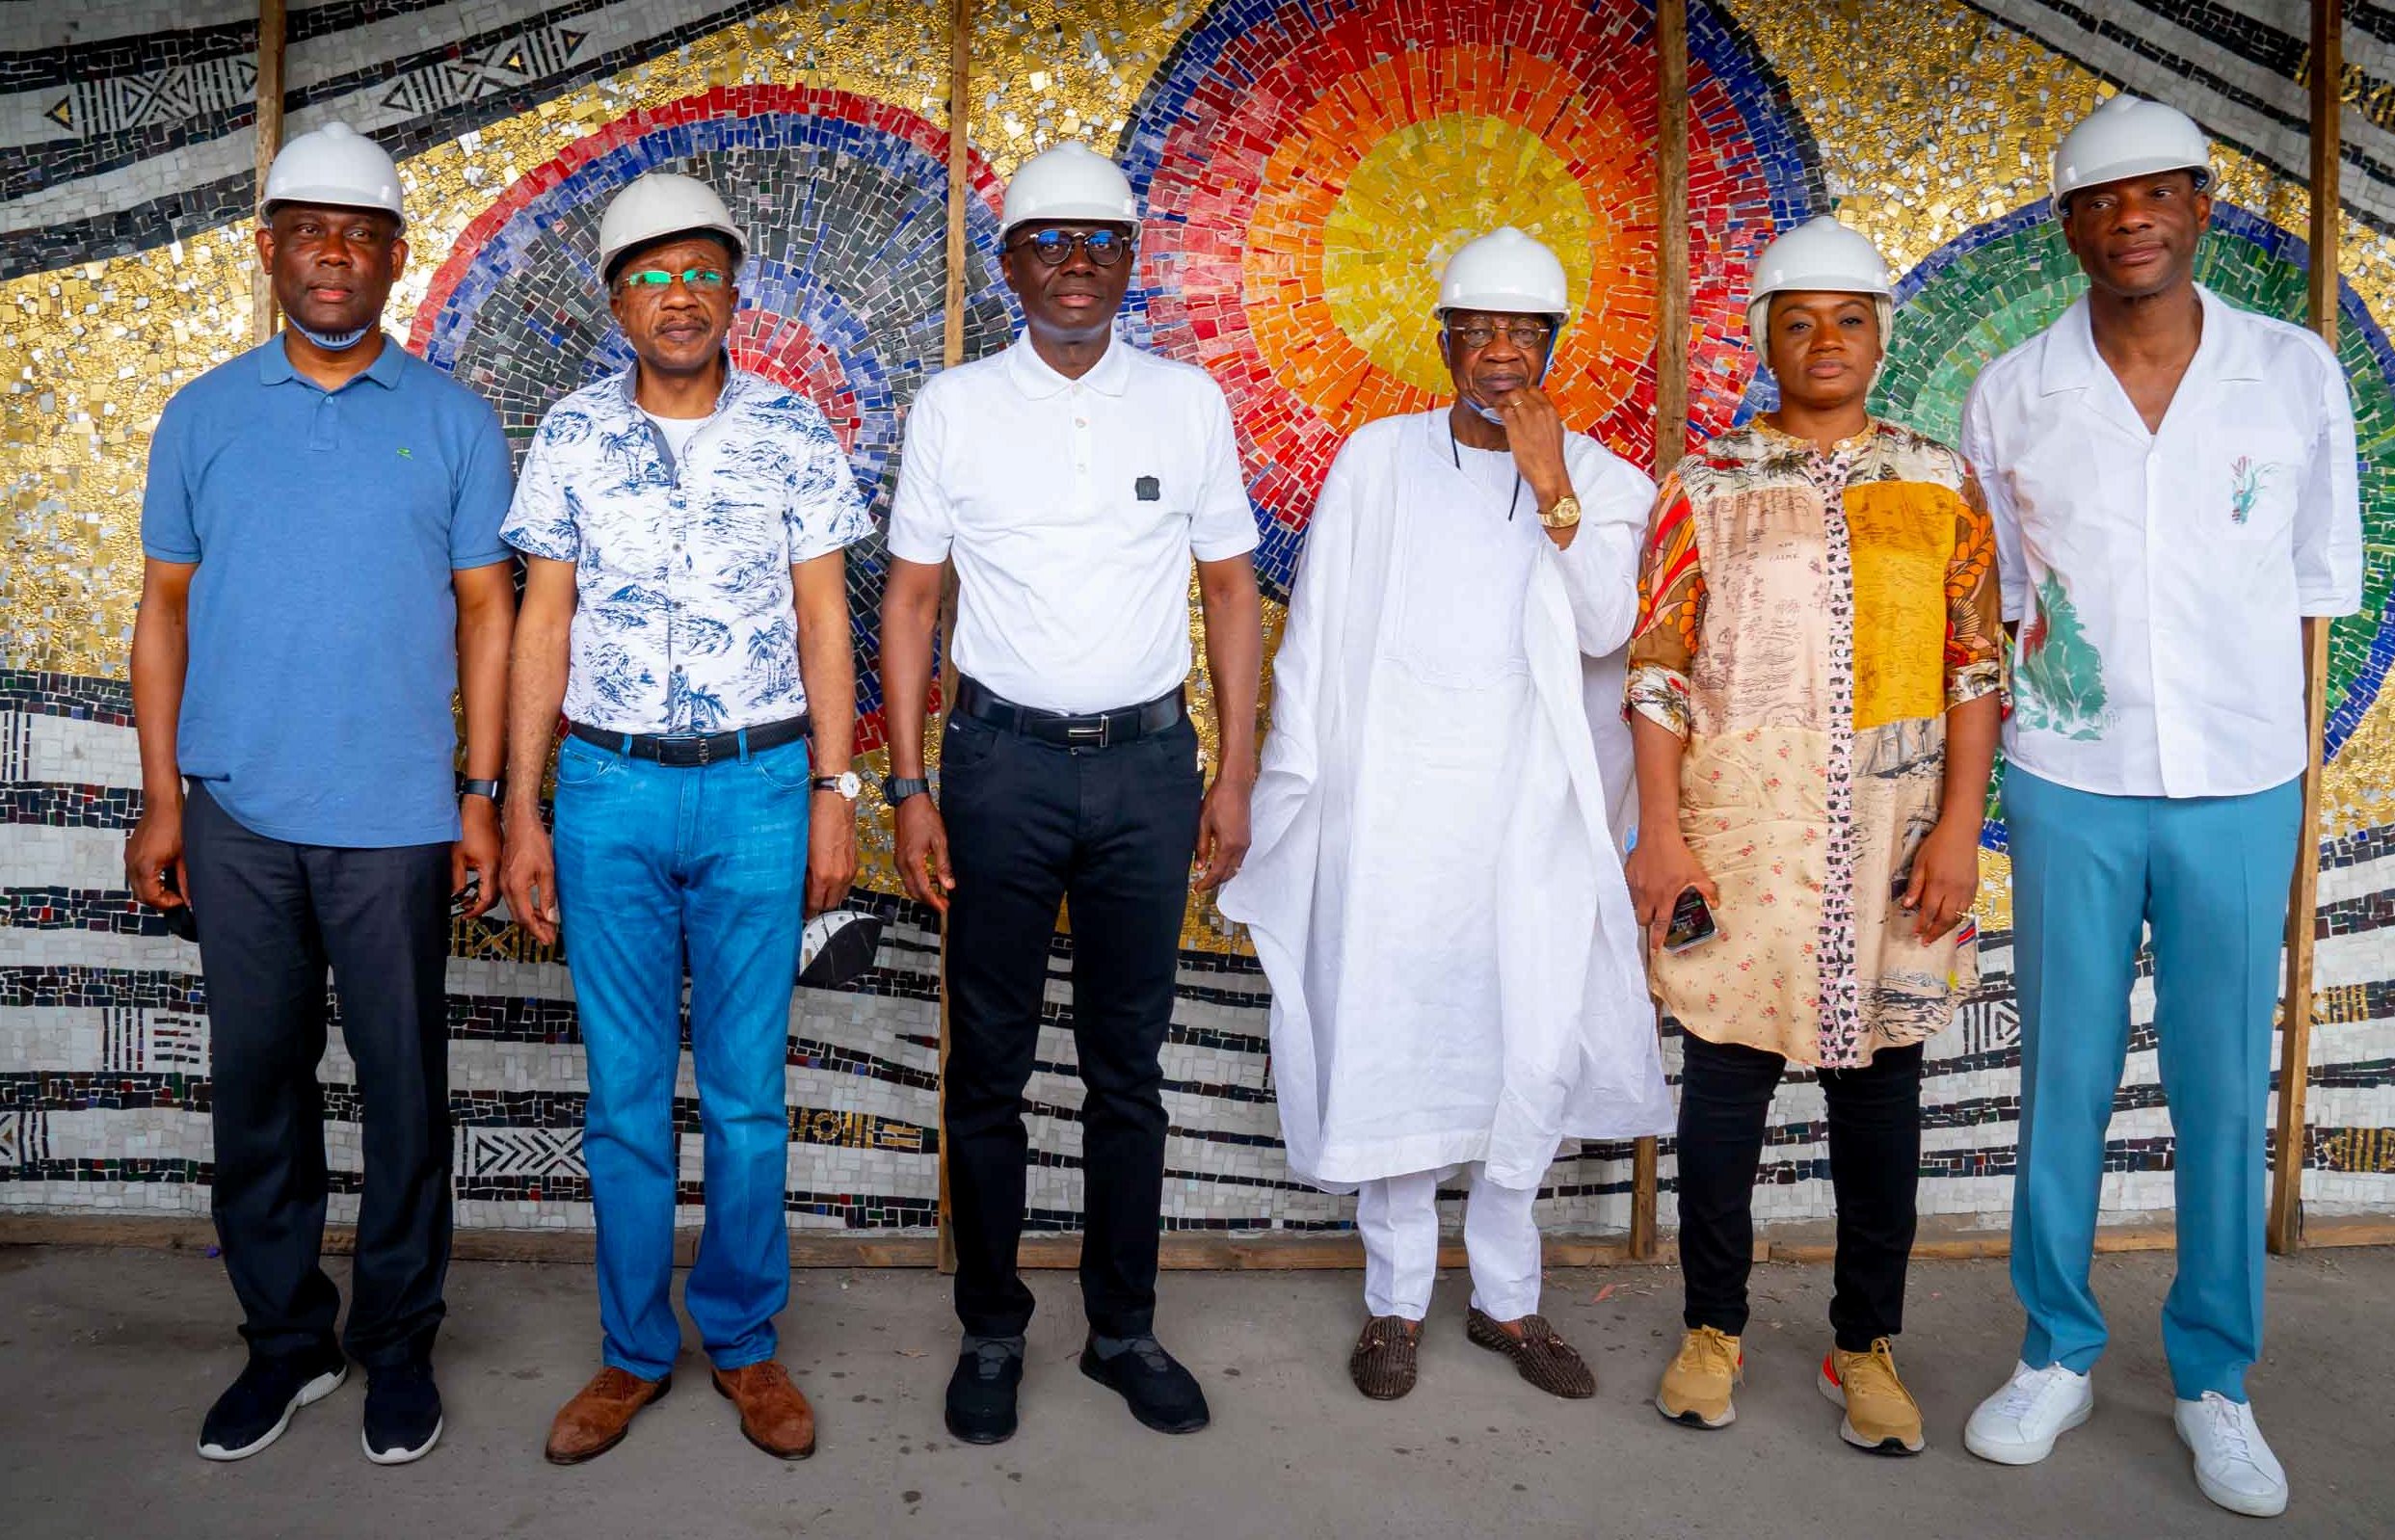 GOV. SANWO-OLU, ALHAJI LAI MOHAMMED, EMEFIELE AT THE INSPECTION TOUR OF THE NATIONAL ARTS THEATRE PROJECT SITE